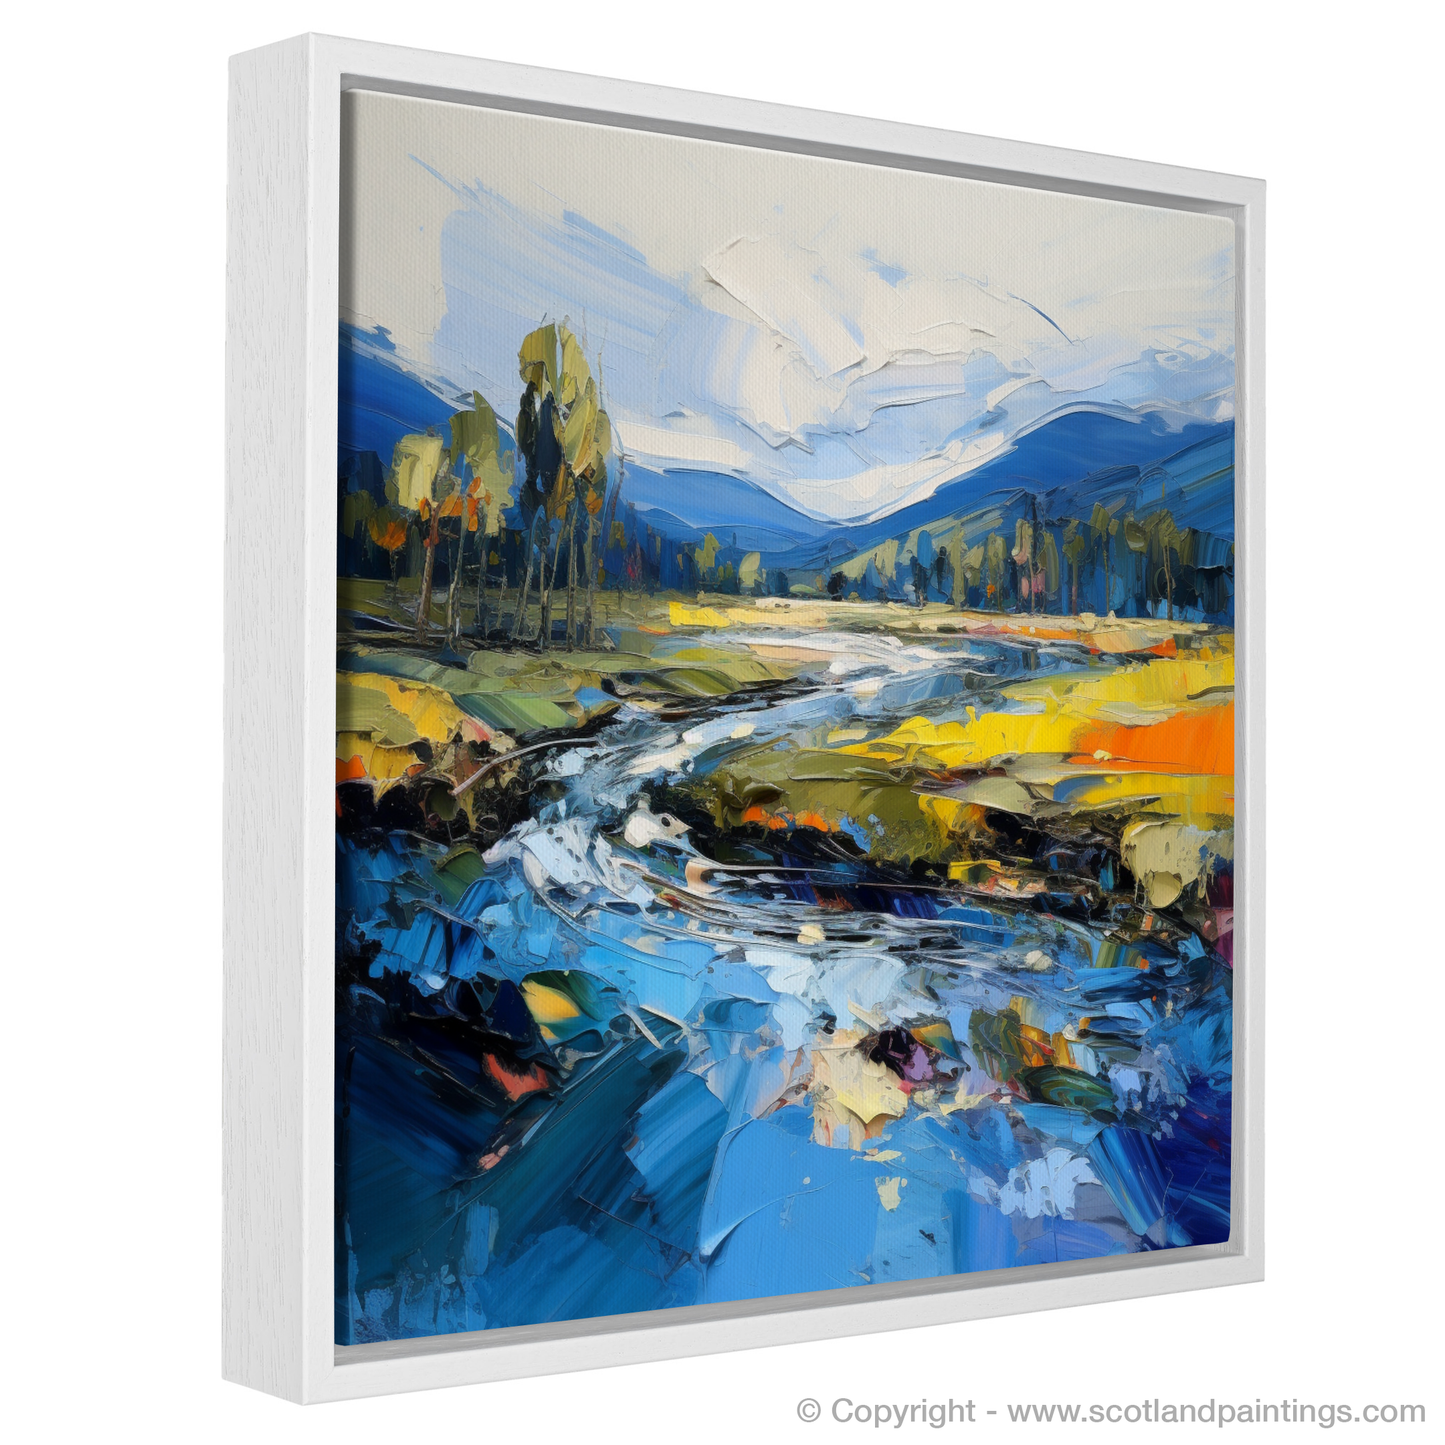 Painting and Art Print of River Spey, Highlands entitled "Highland Rhapsody: An Expressionist Ode to River Spey".